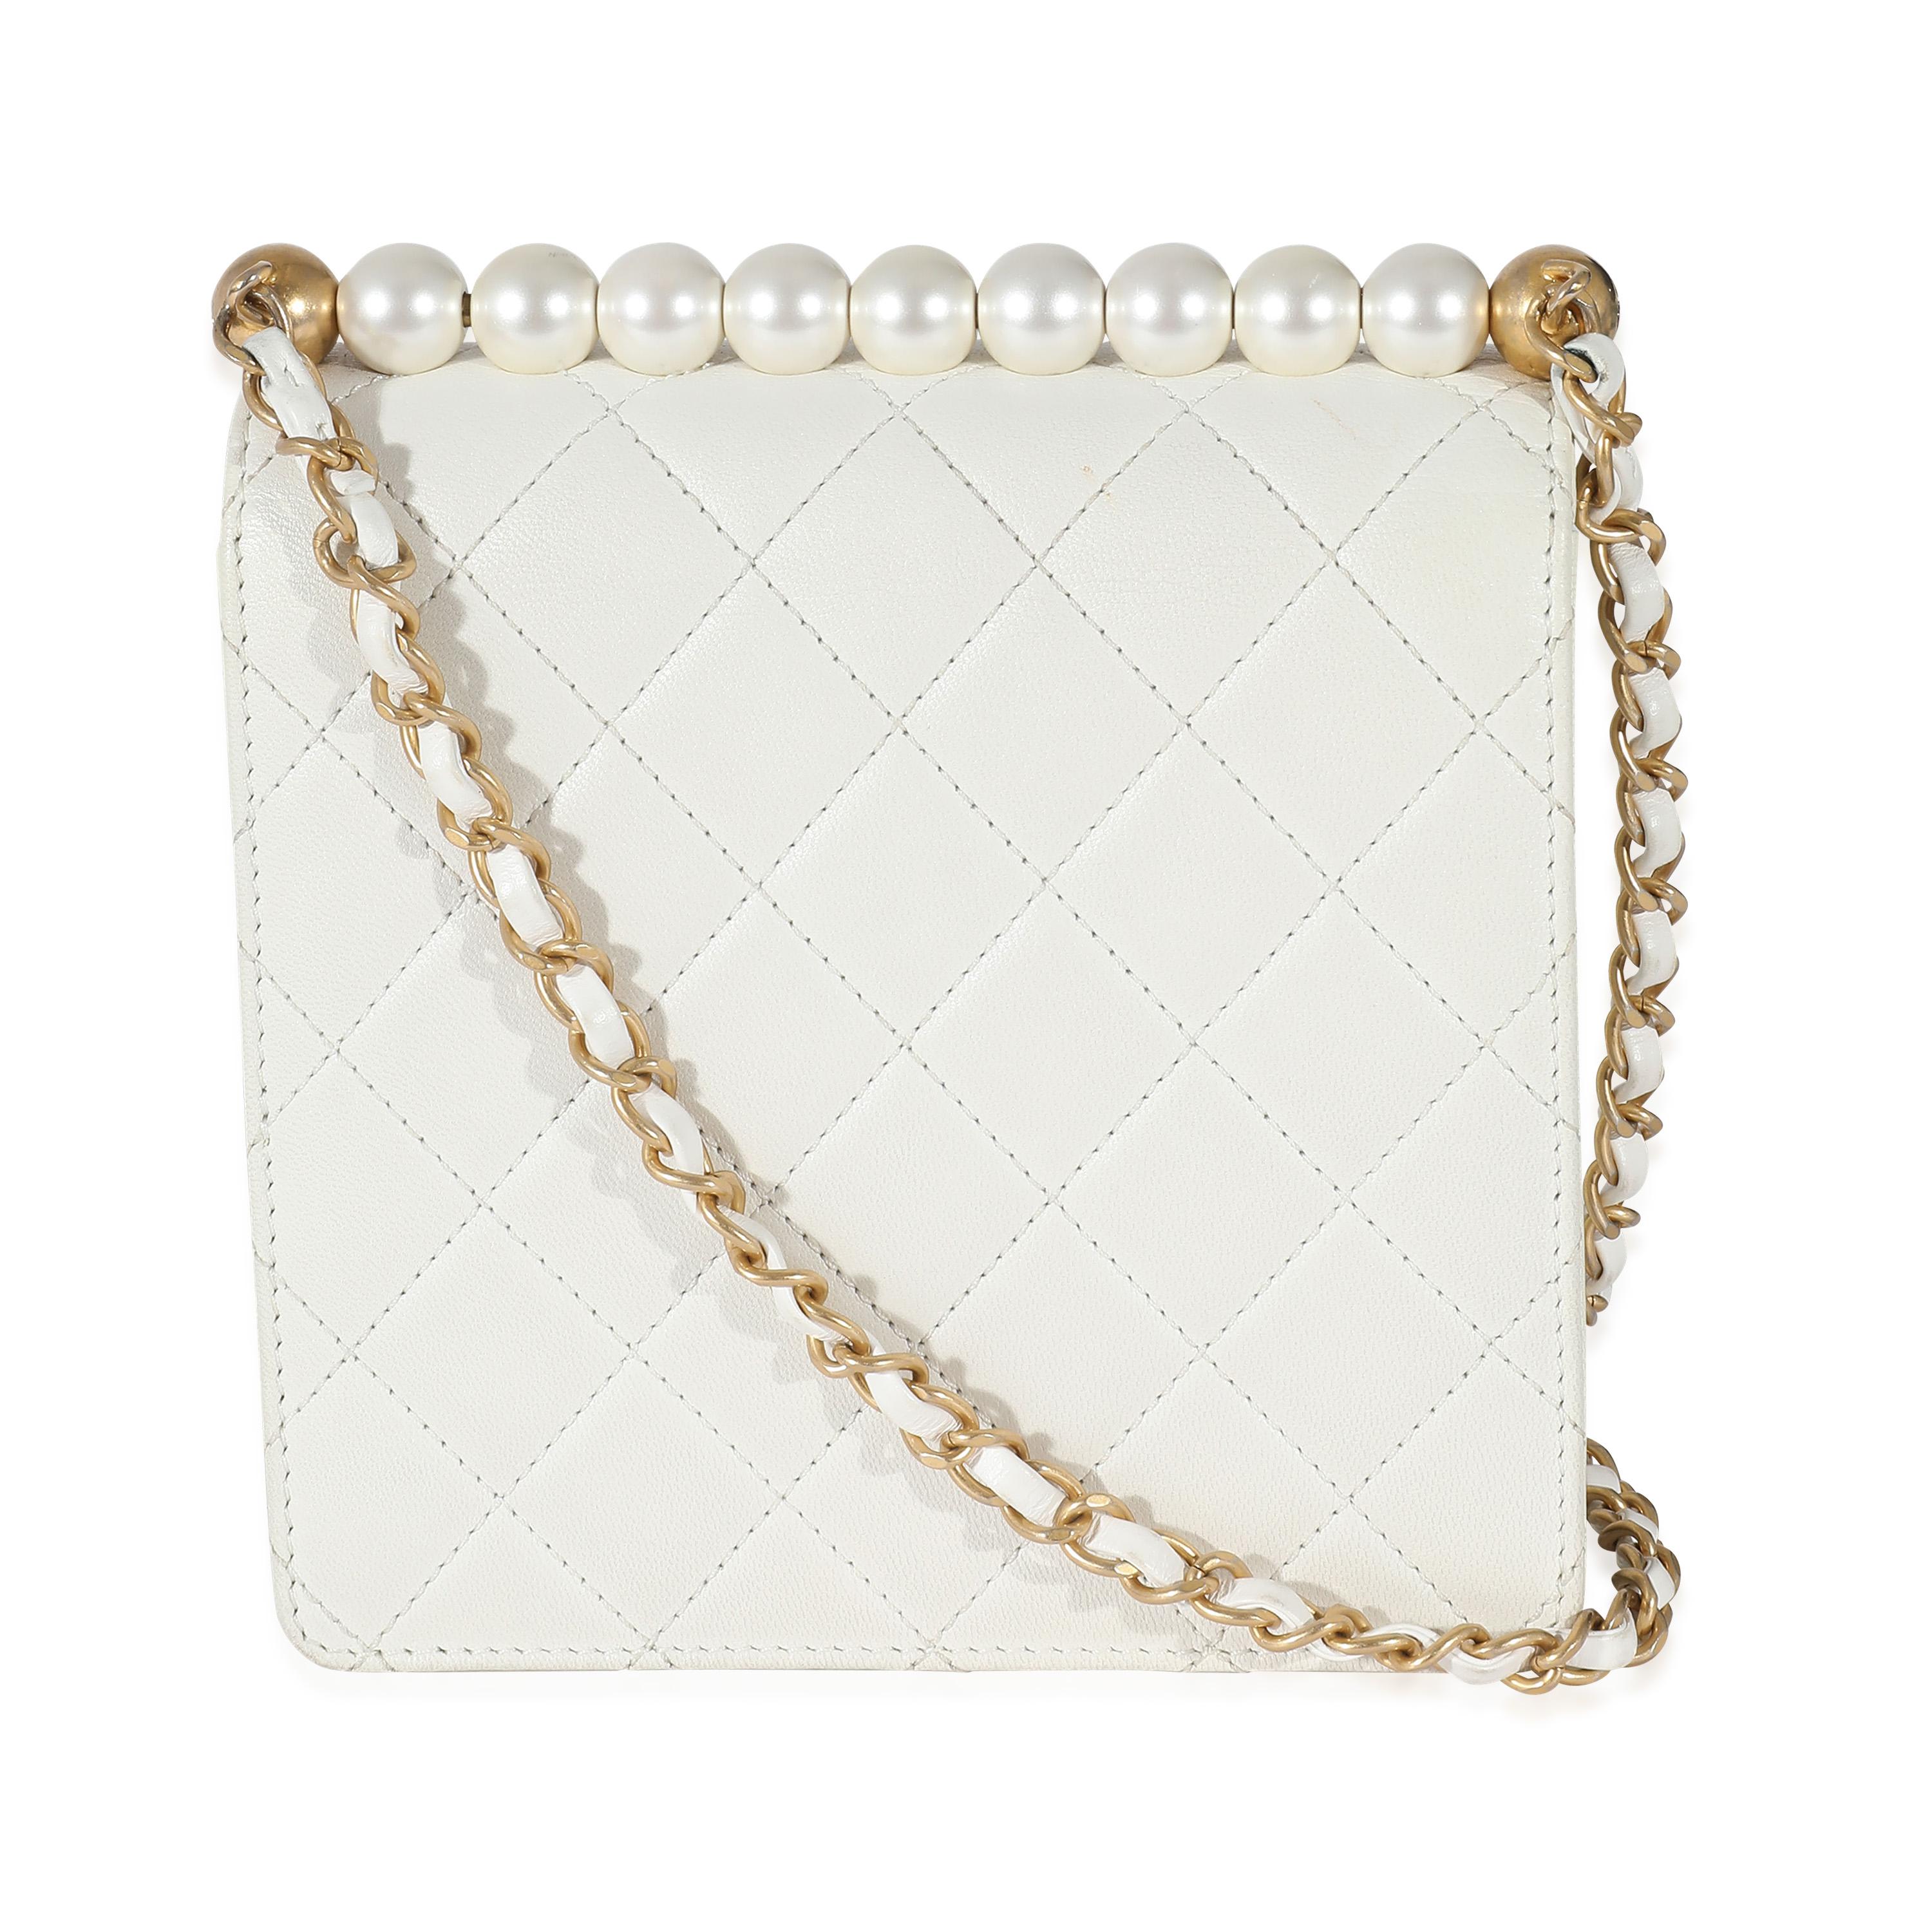 Chanel White Quilted Goatskin Vertical Chic Pearls Flap Bag In Excellent Condition For Sale In New York, NY